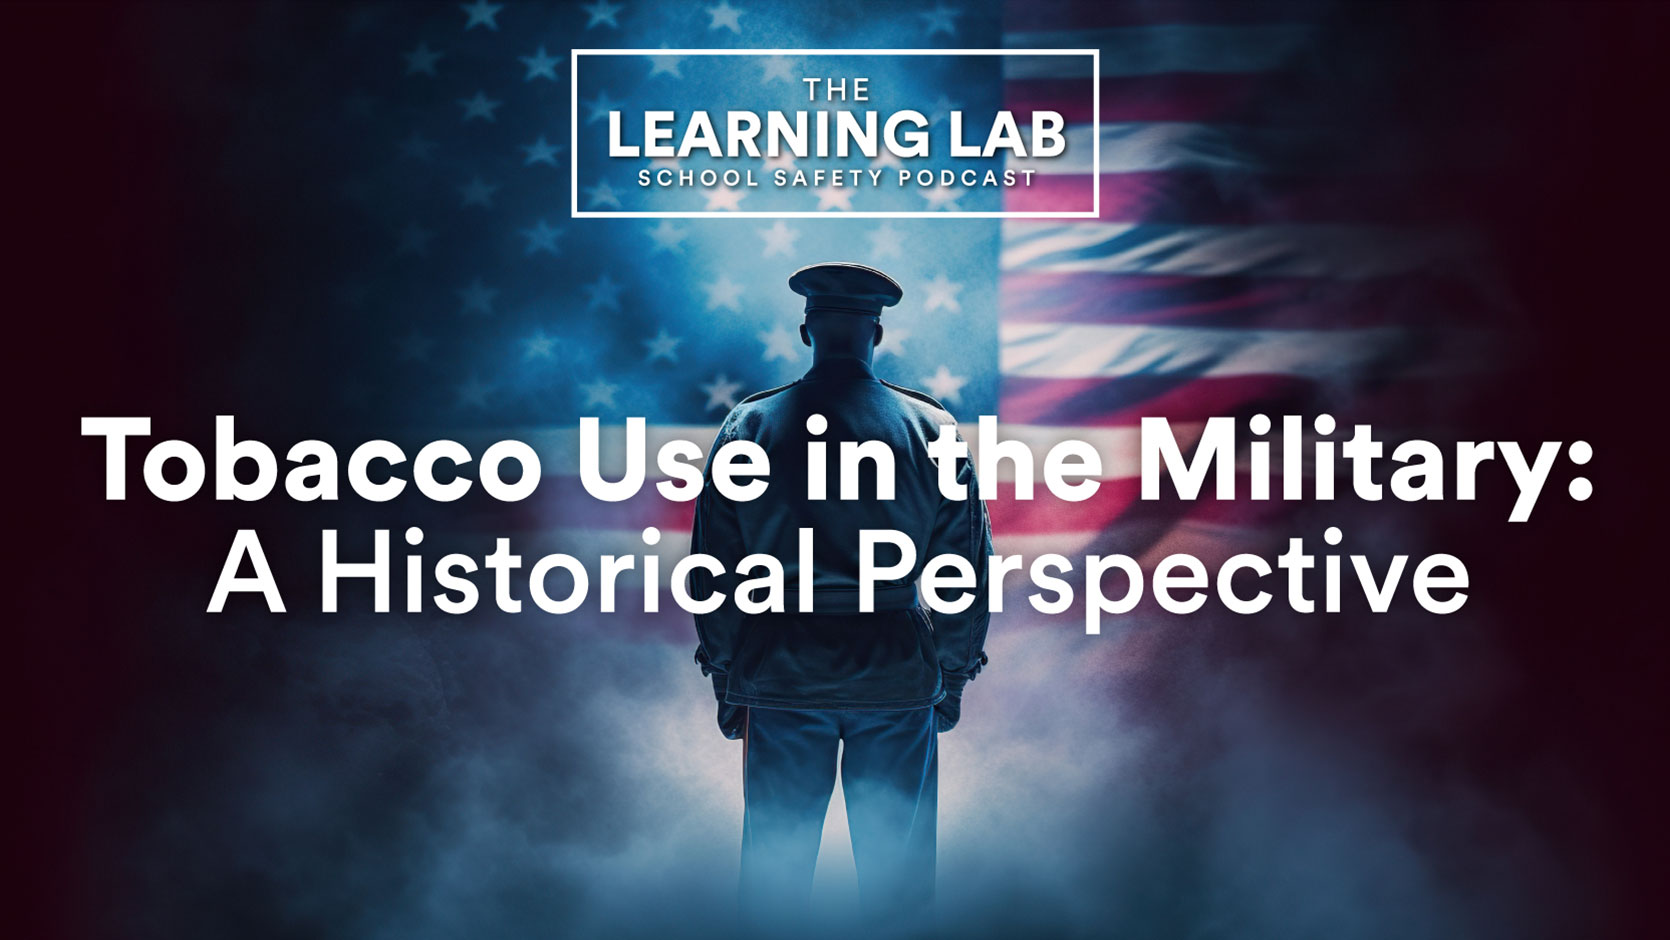 Tobacco Use in the military: A Historical Perspective